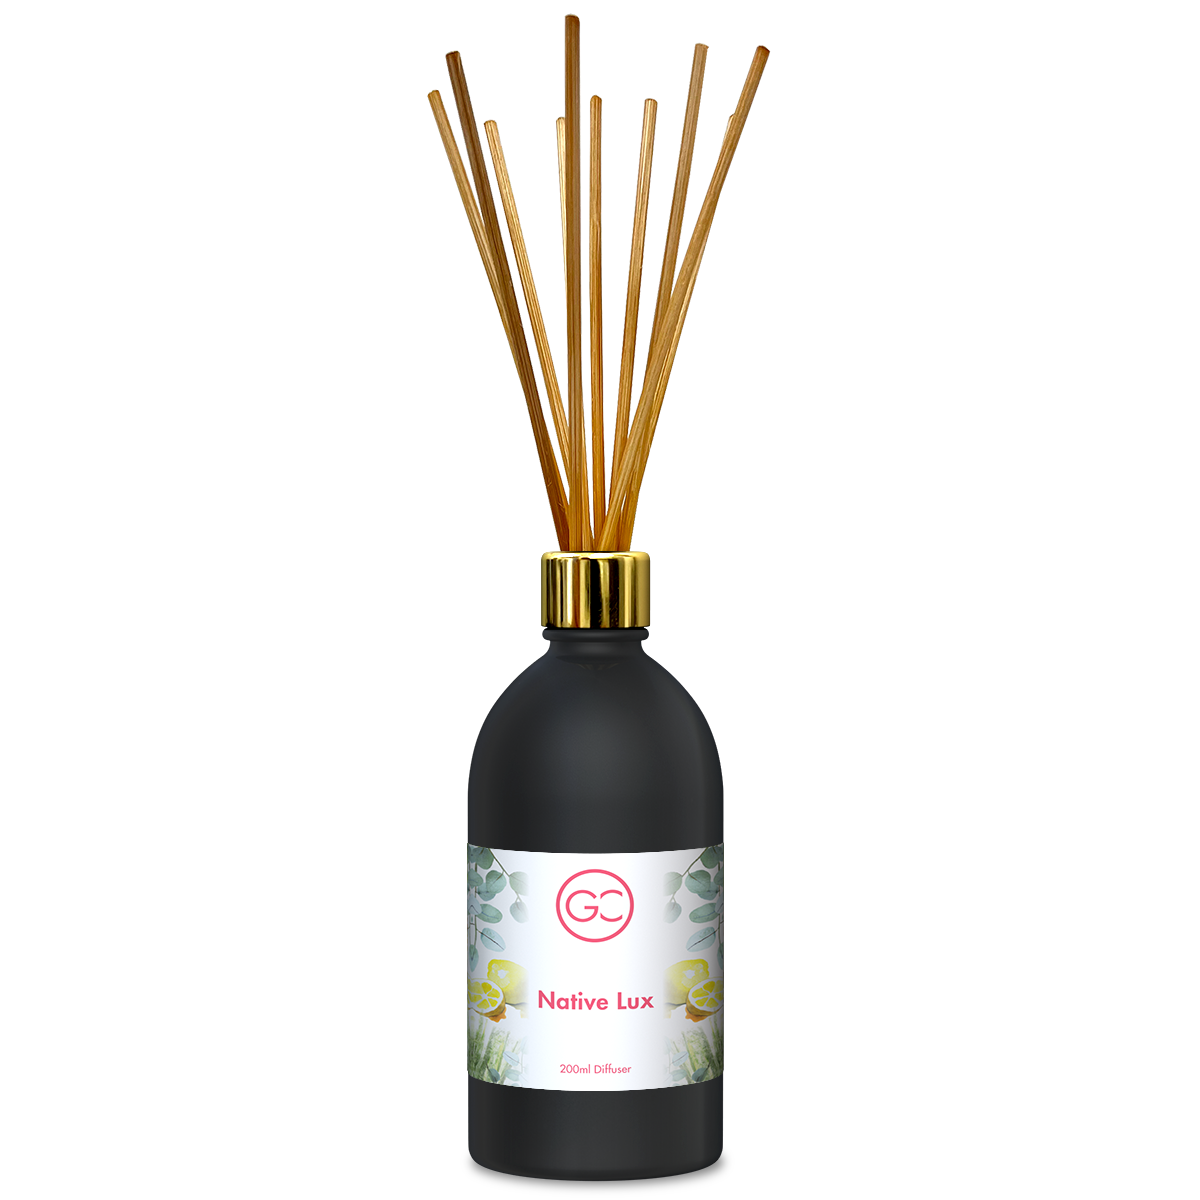 Native Lux Reed Diffuser 200ml